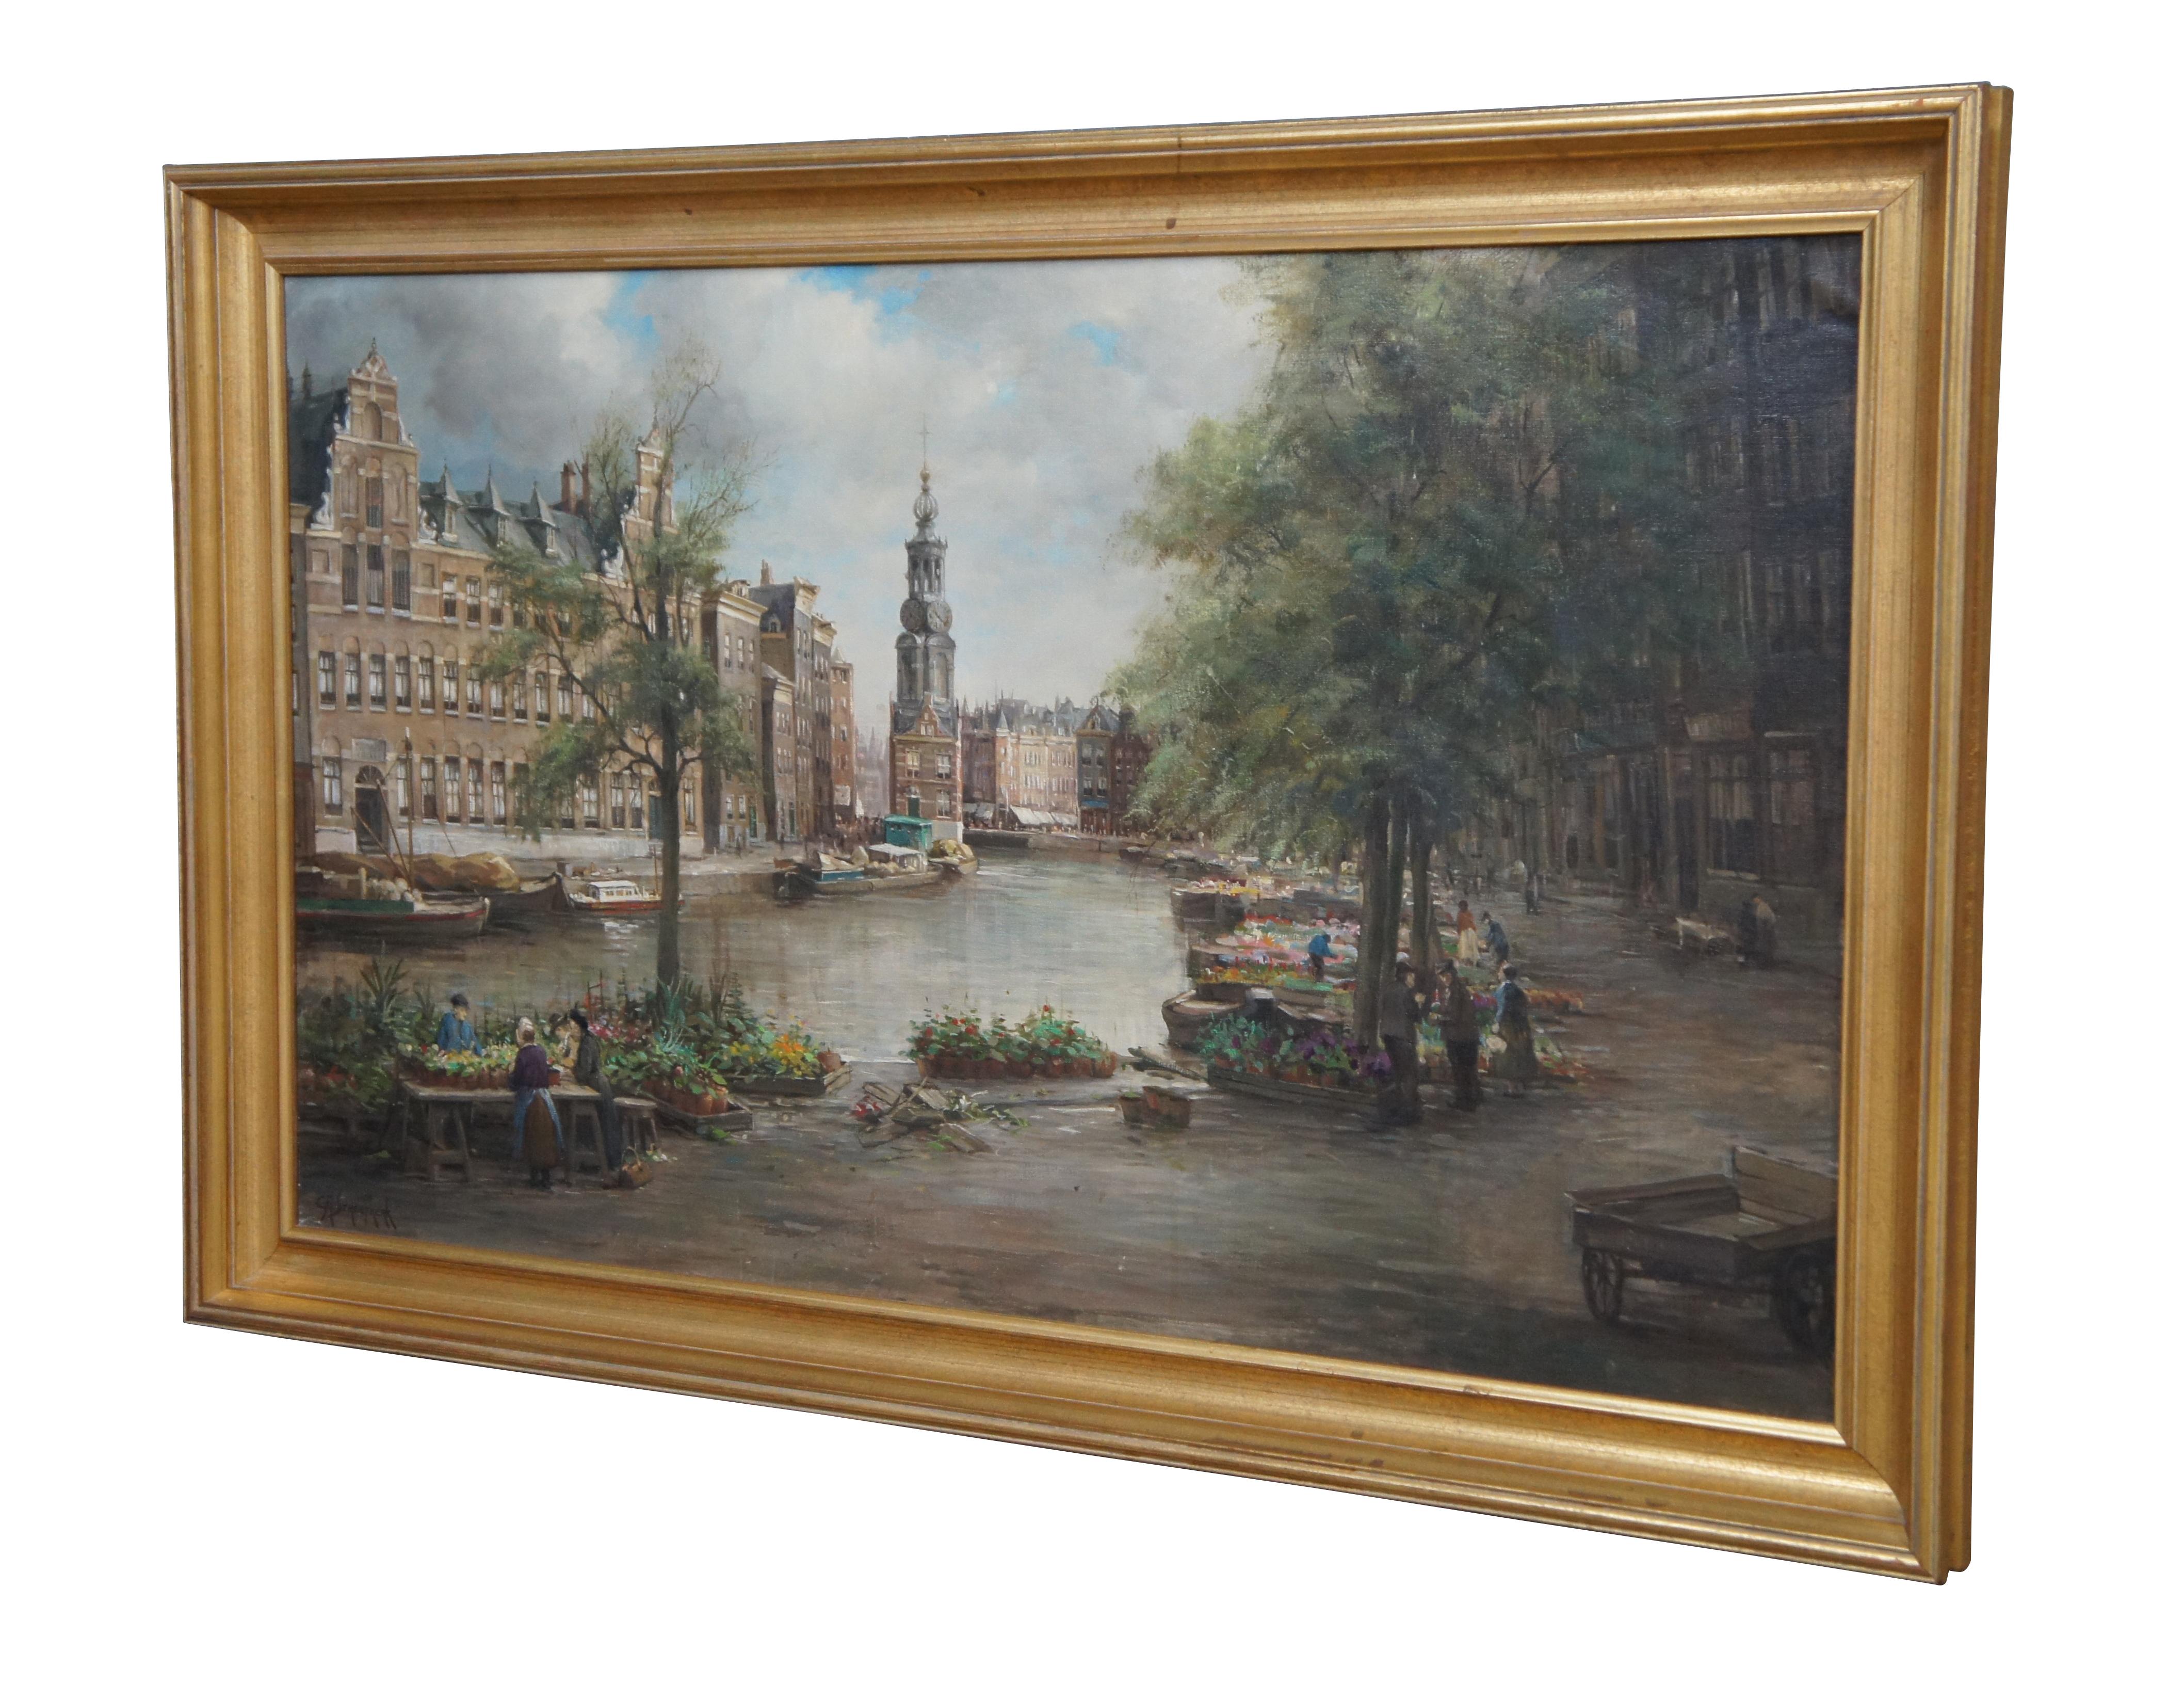 Early to mid 20th century oil on canvas painting by Carl August Streefkerk (Dutch, 1884-1968) showing a view of Amsterdam’s Bloemenmarkt (Flower Market) along the Singel Canal with the Munttoren (aka Munt) tower visible in the background. Carl